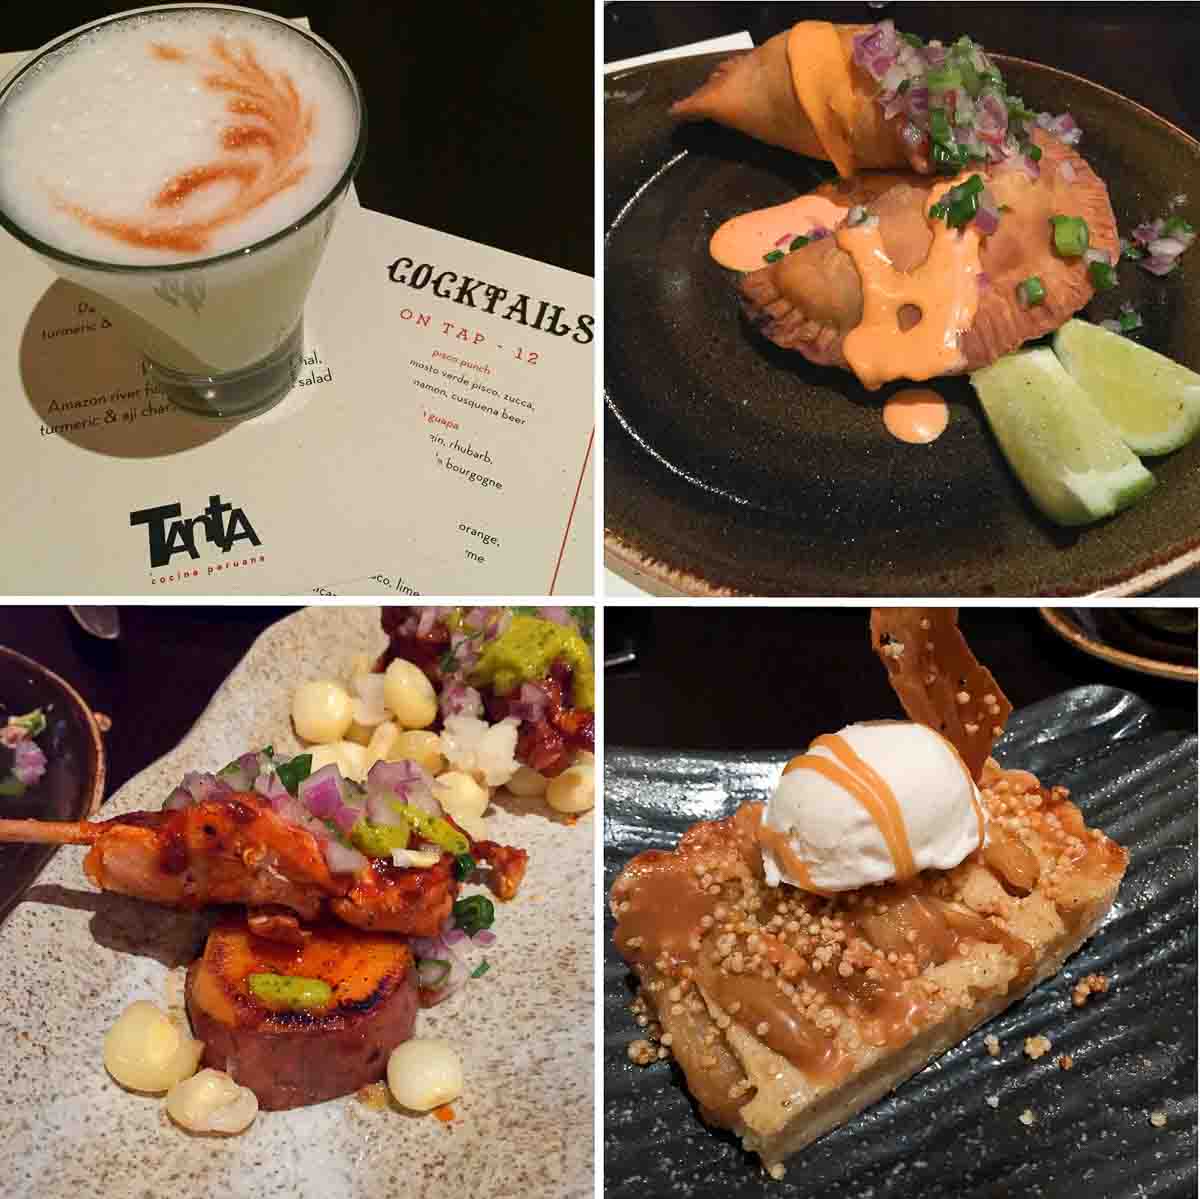 Chicago Food Restaurants and Coffee - Tanta